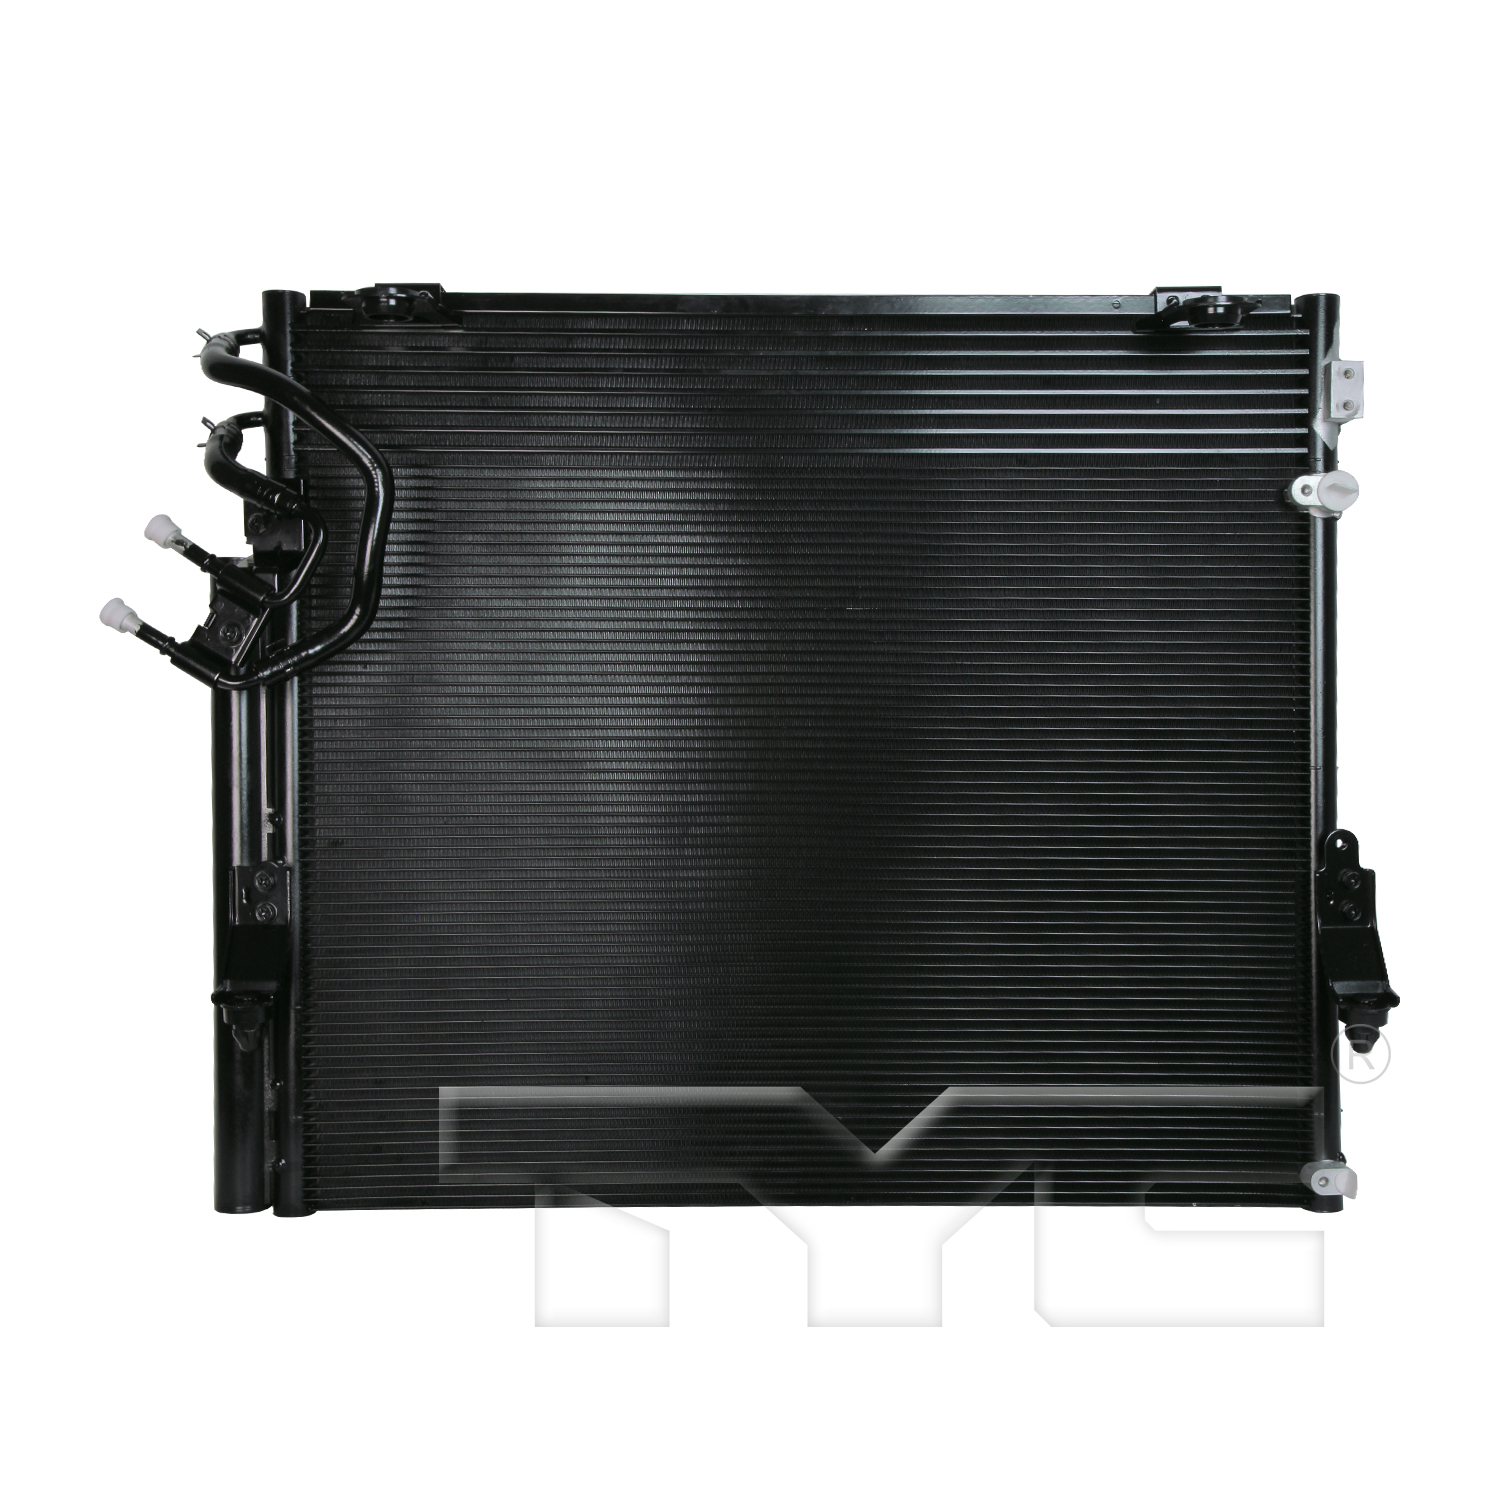 Replacement TOYOTA TUNDRA AC CONDENSERS | Aftermarket AC CONDENSERS for